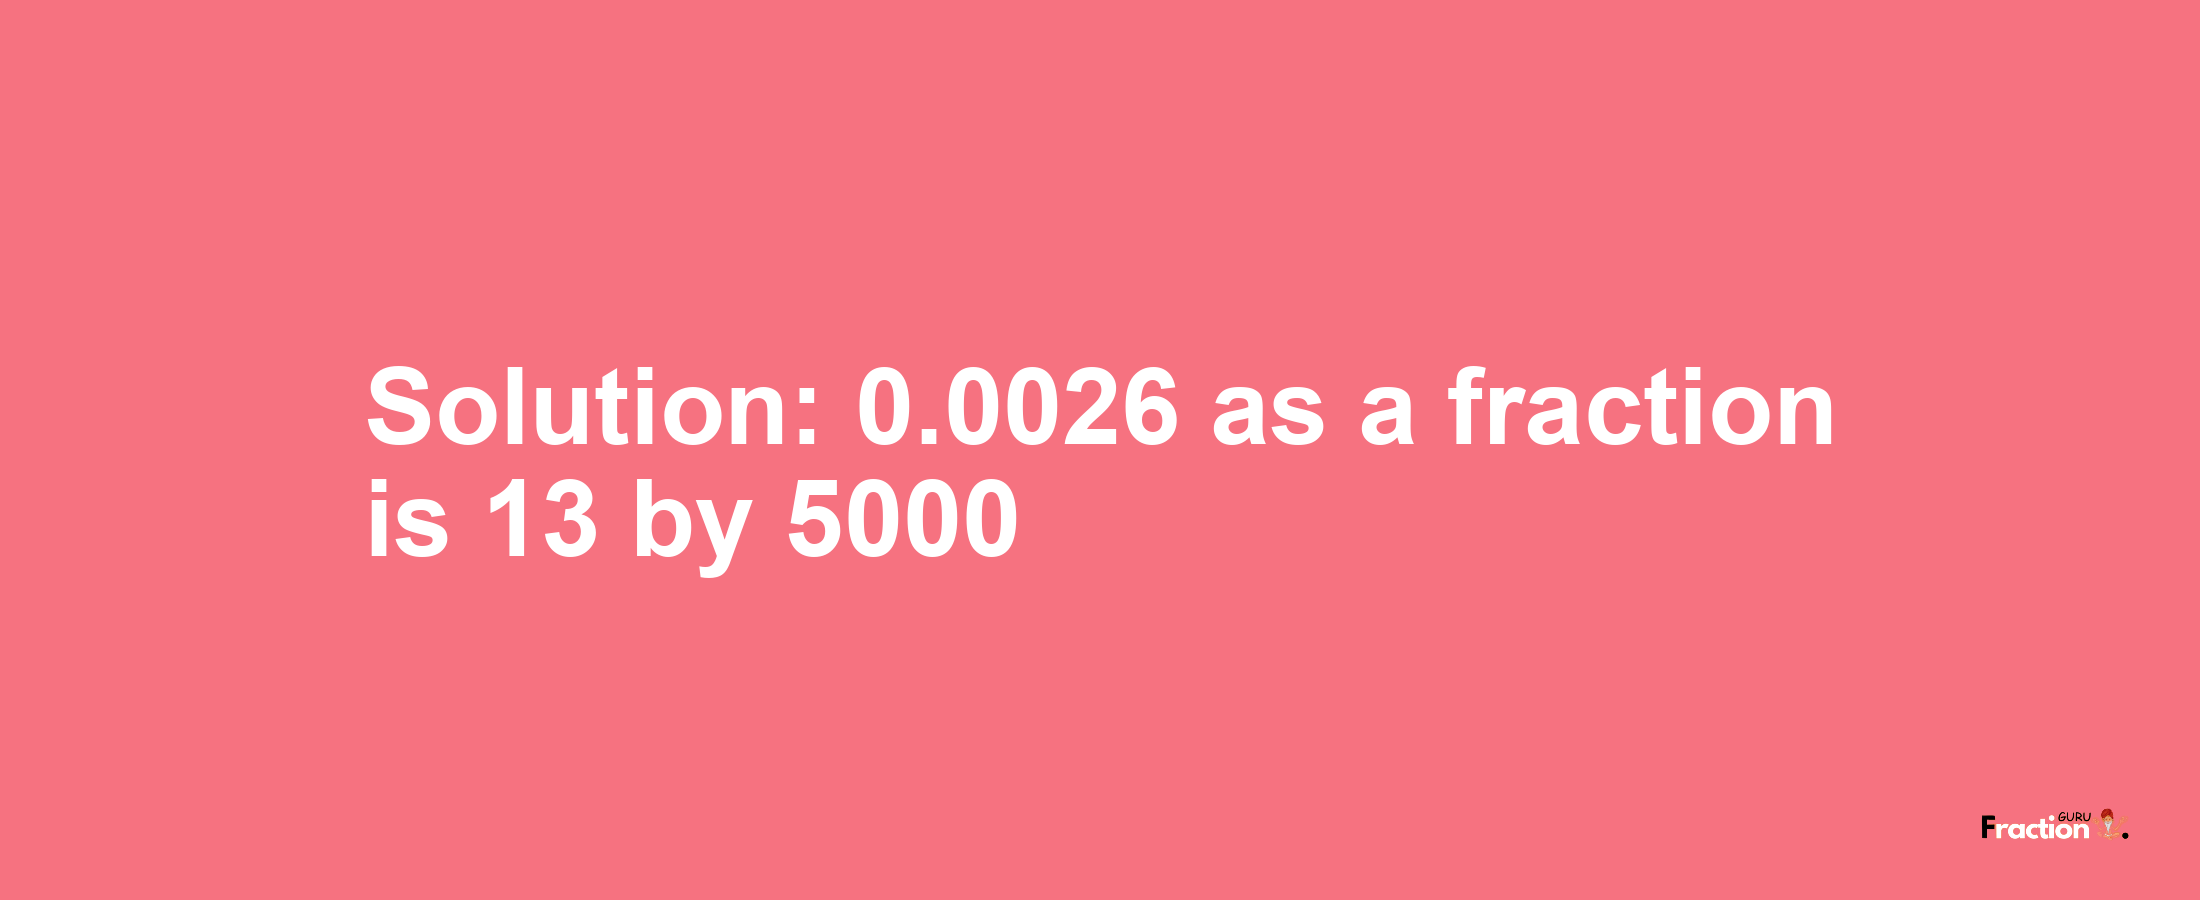 Solution:0.0026 as a fraction is 13/5000